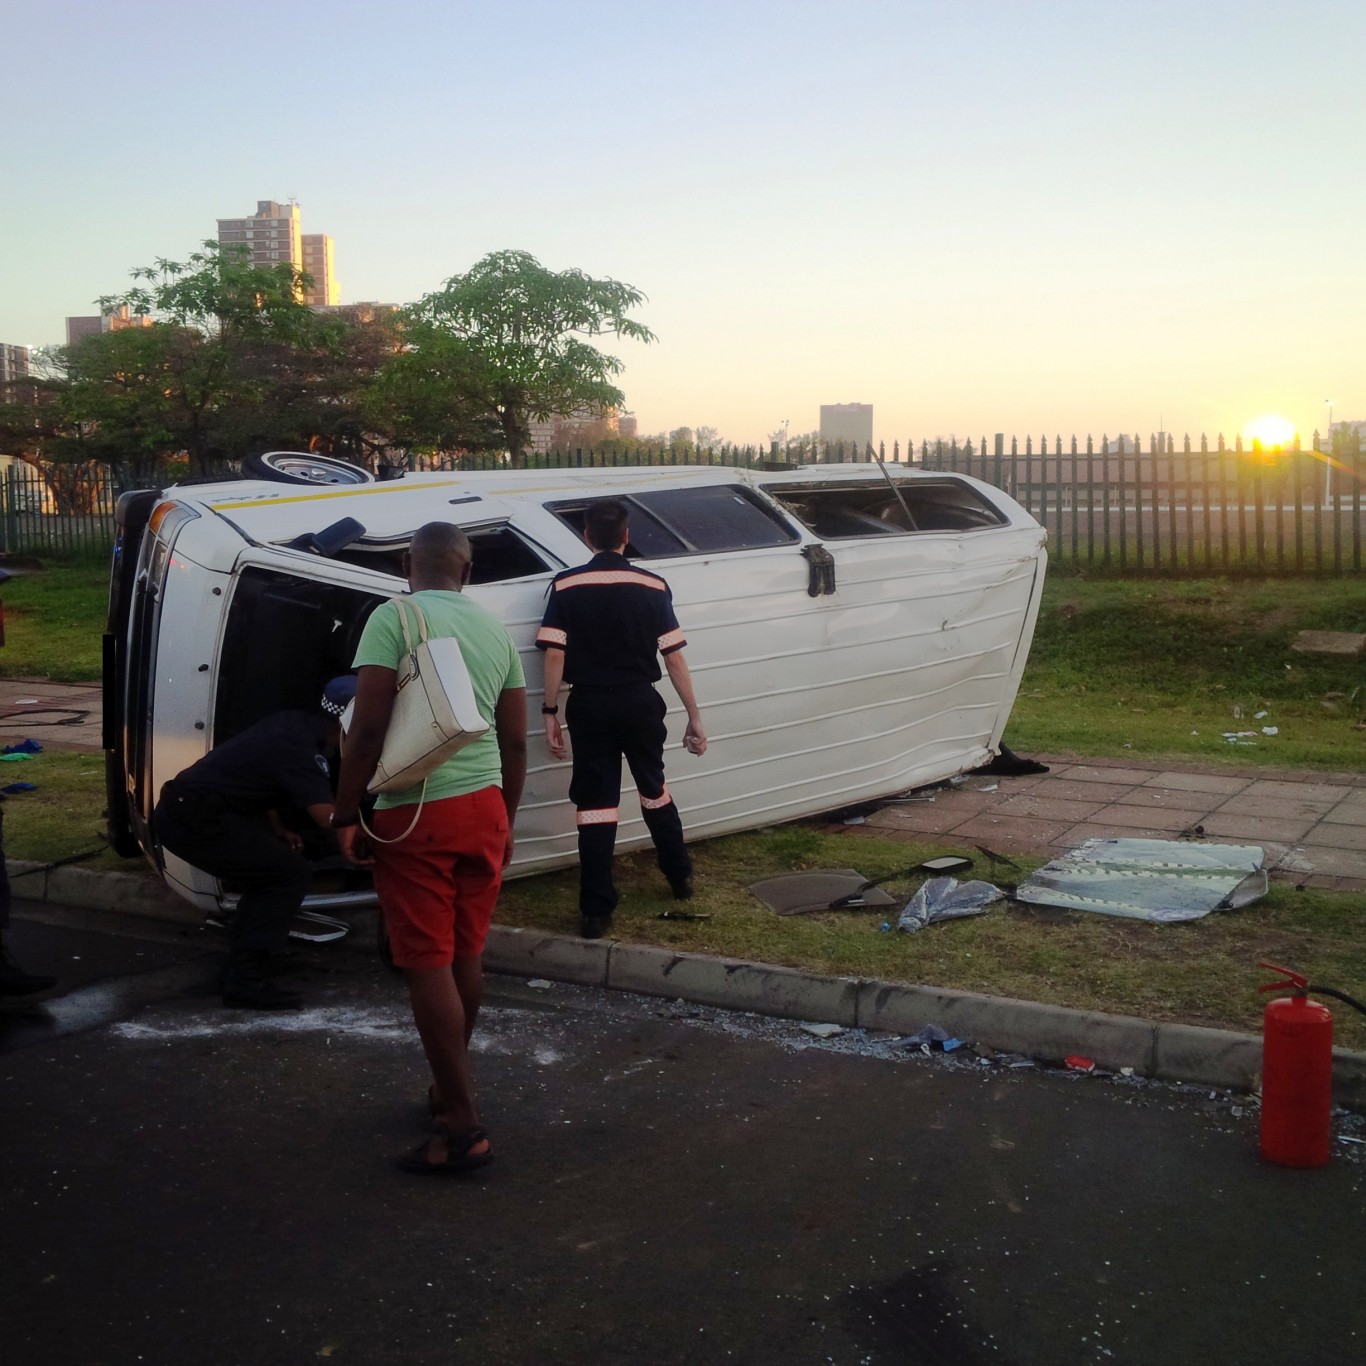 Taxi crash at intersection in Durban leaves several injured